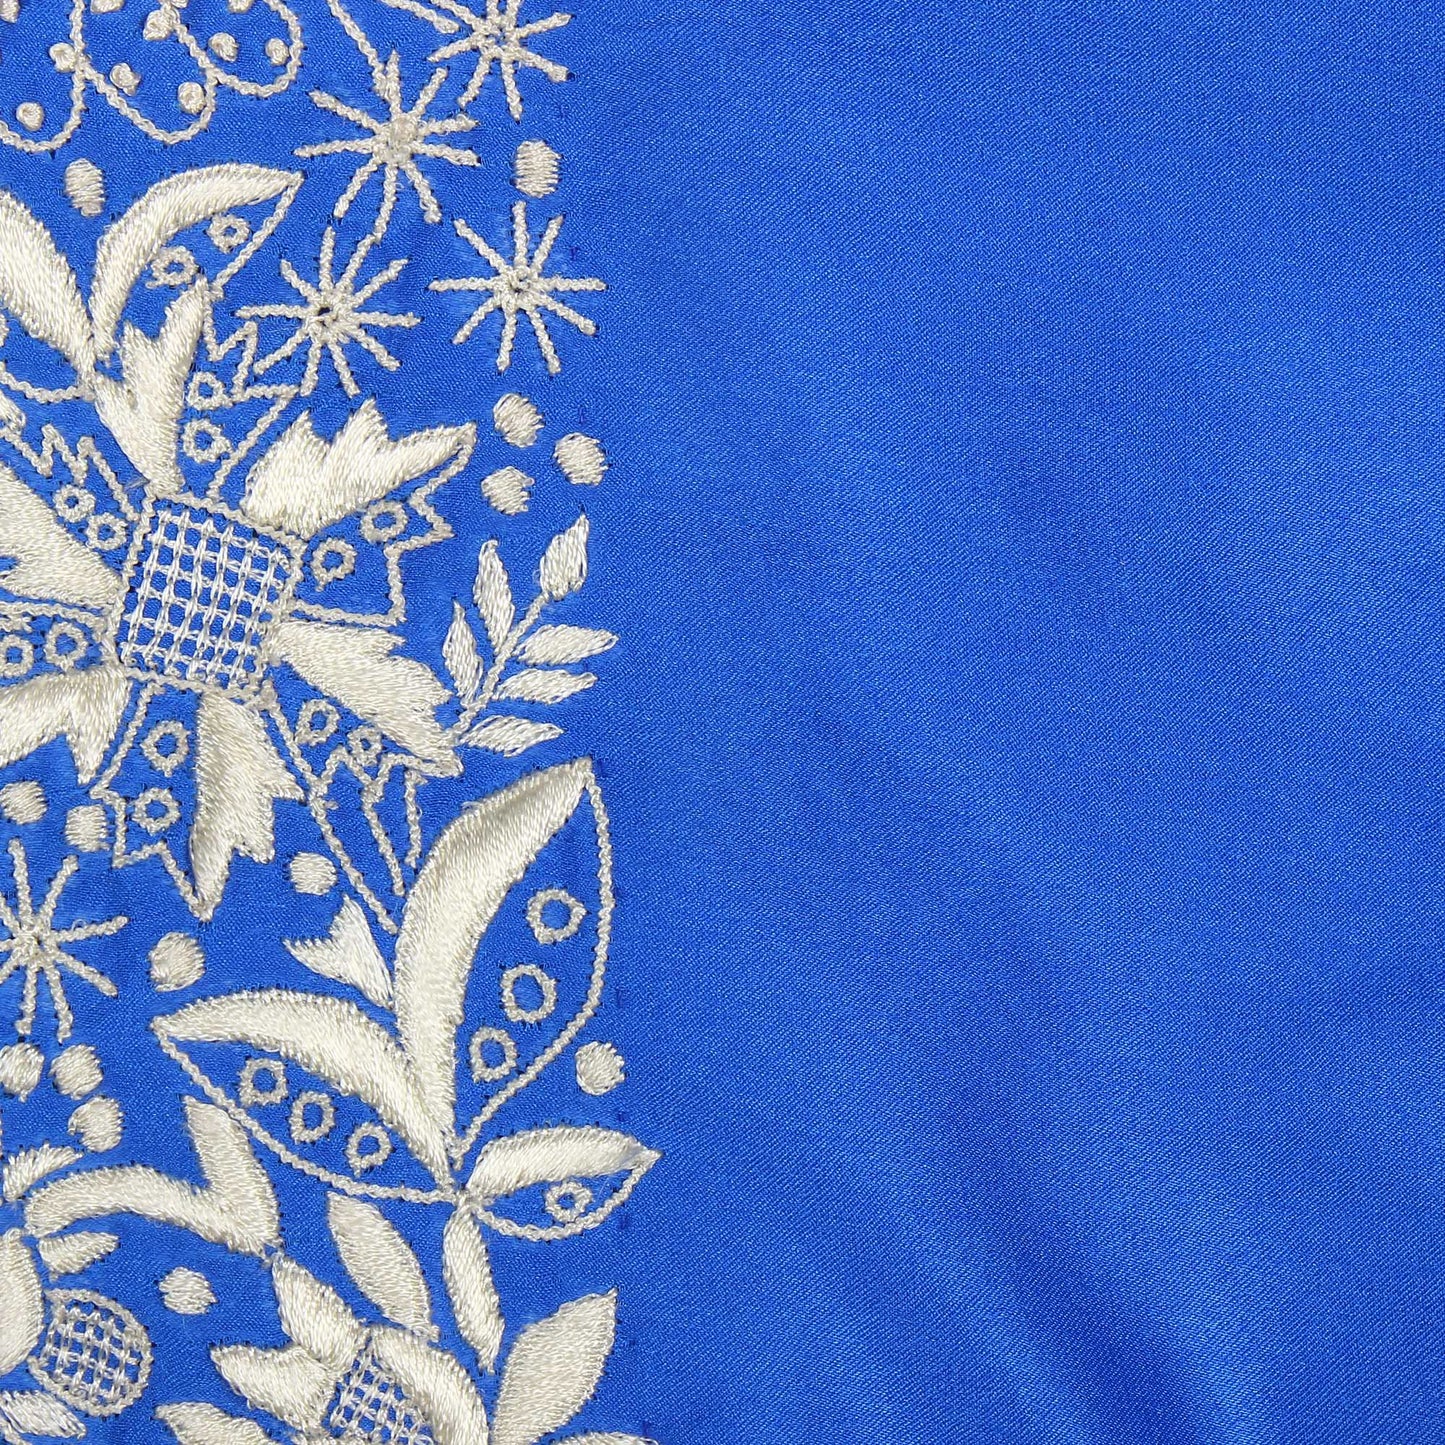 Parsi embroidery designs on silk stole 